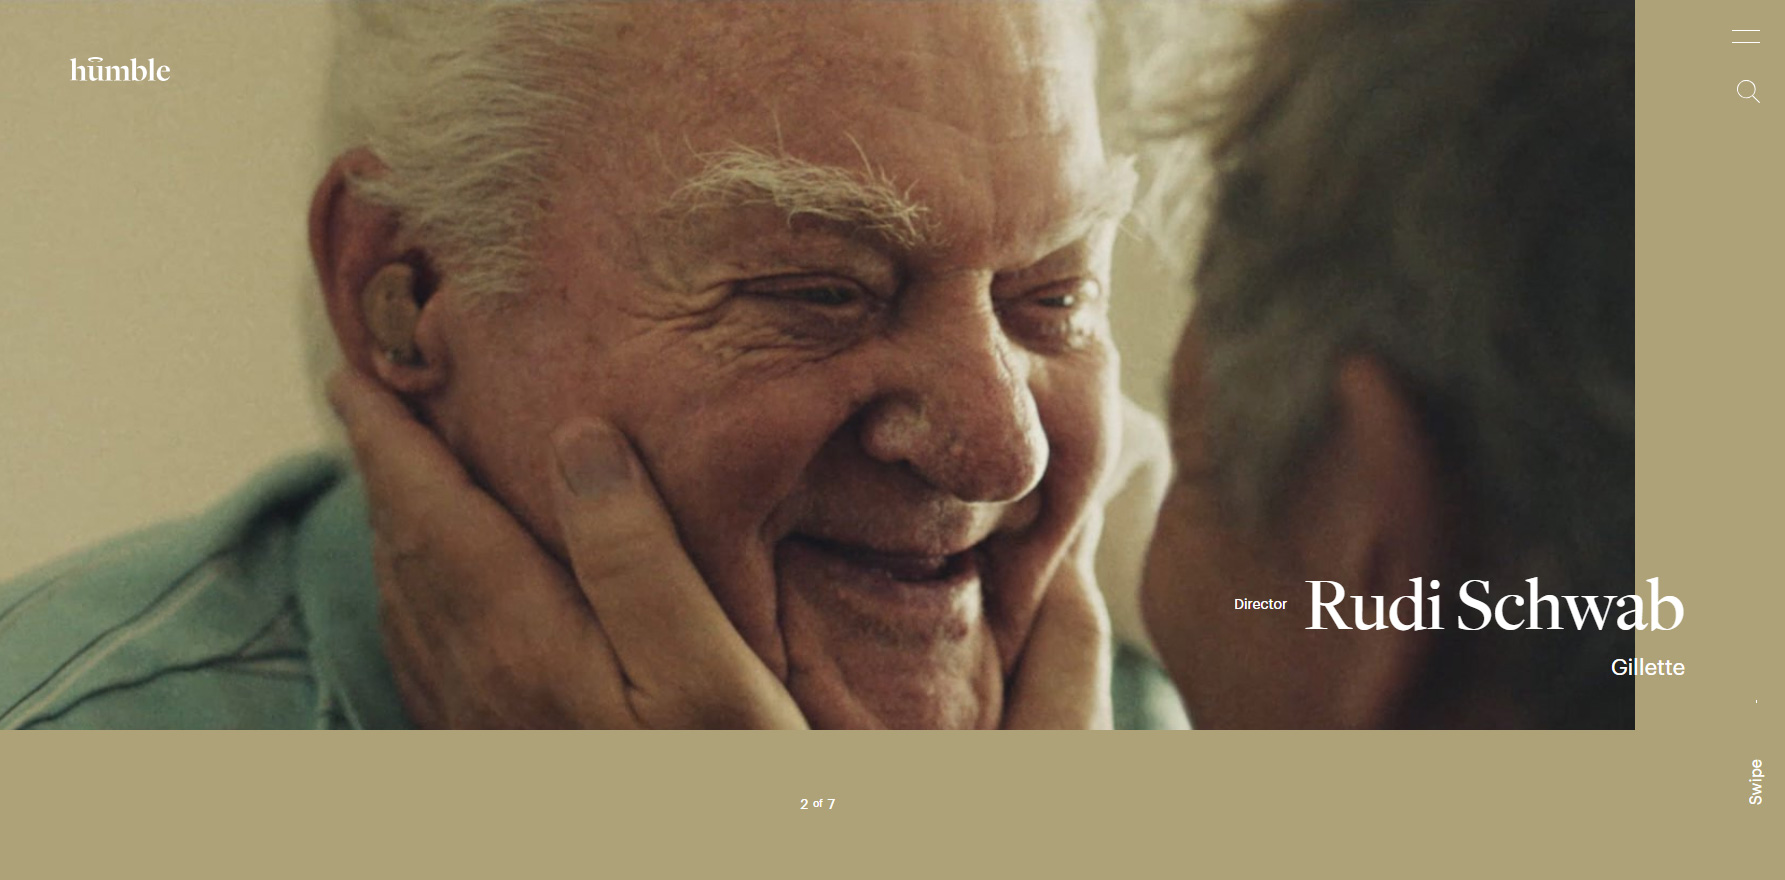 Humble - Website of the Day